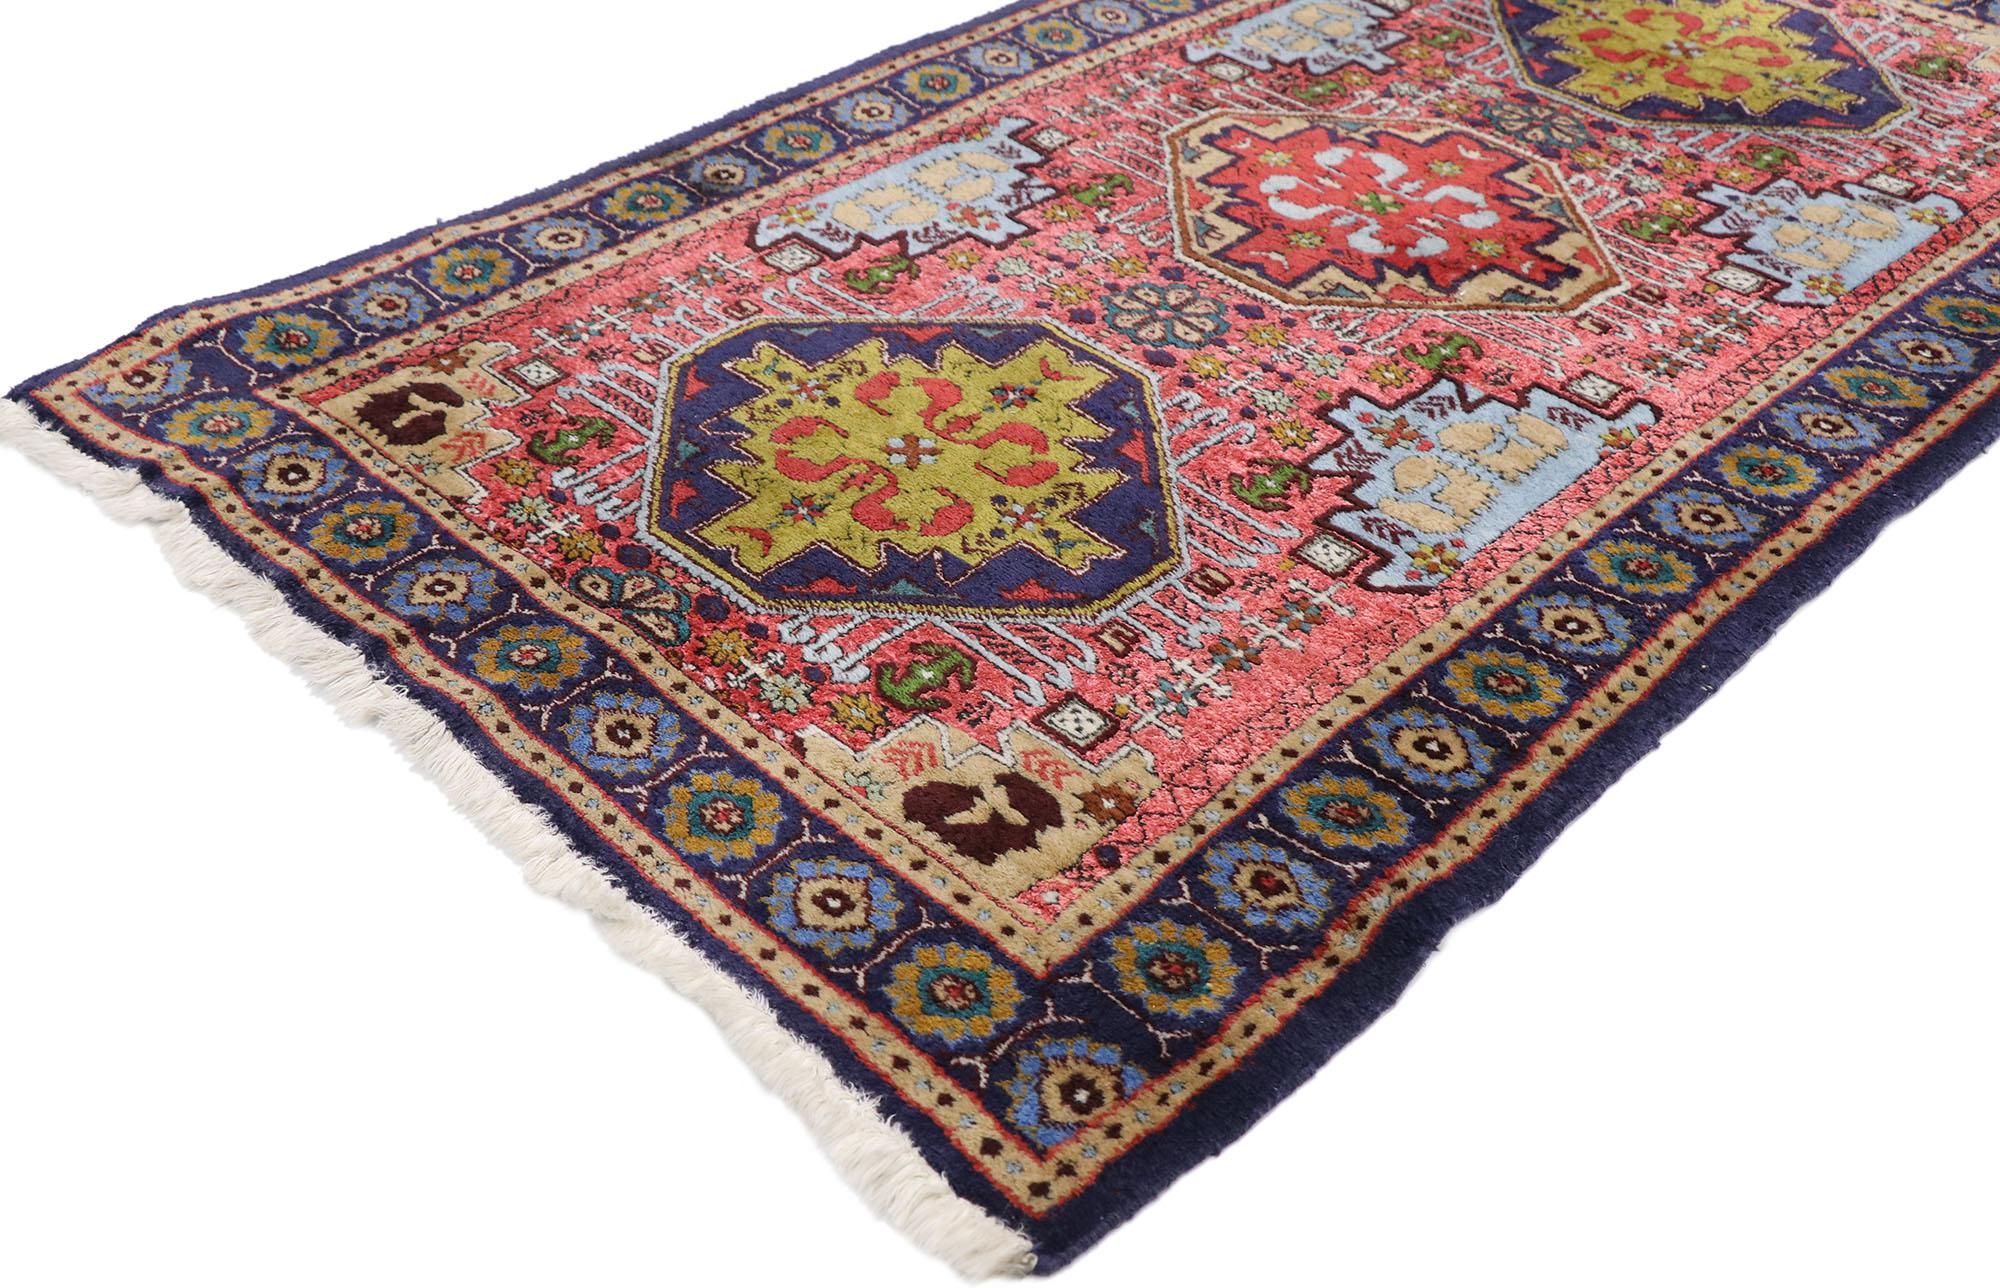 77657 Vintage Persian Ardabil rug with Boho Chic Tribal style 02'08 x 04'08. Full of tiny details and a bold expressive design combined with exuberant colors and bohemian style, this hand-knotted wool and silk vintage Persian Ardabil rug is a